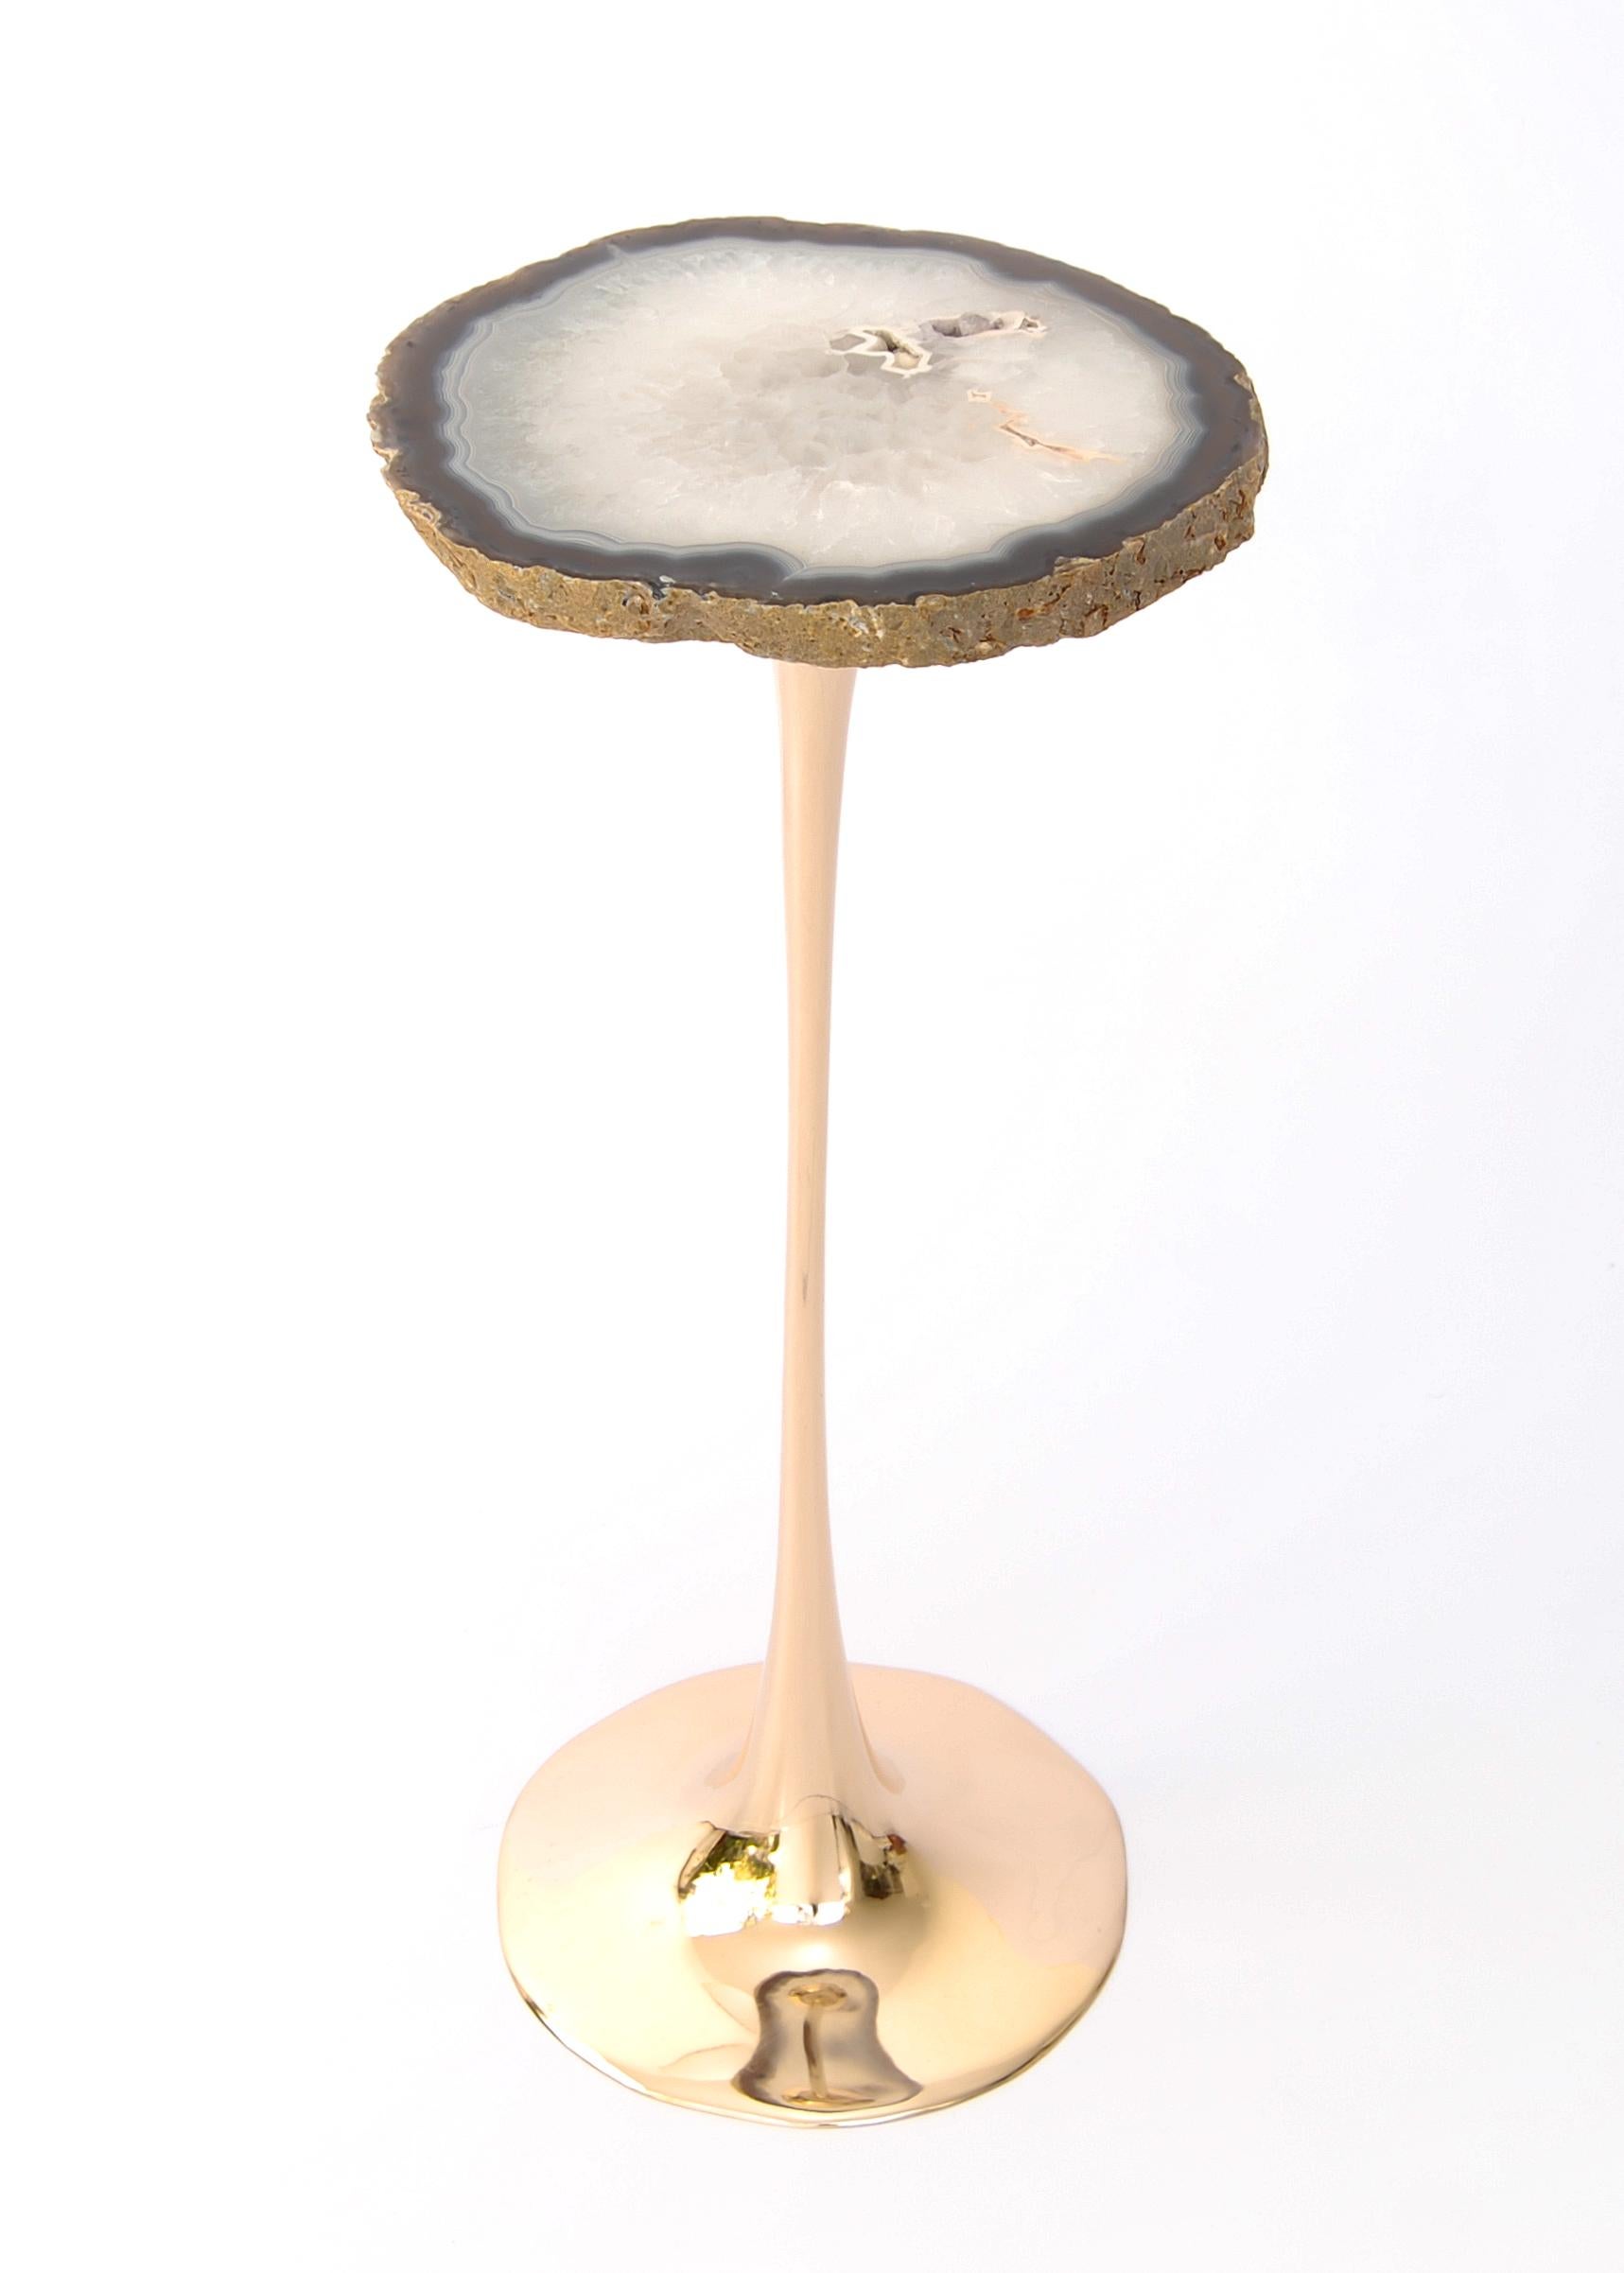 Apple drink table with Agate top by Fakasaka Design
Dimensions: W 25 cm, D 25 cm, H 61 cm.
Materials: polished bronze base, Agate top.
 
Also available in different table top materials:
Nero Marquina Marble 
Marrom Imperial Marble
Pedra